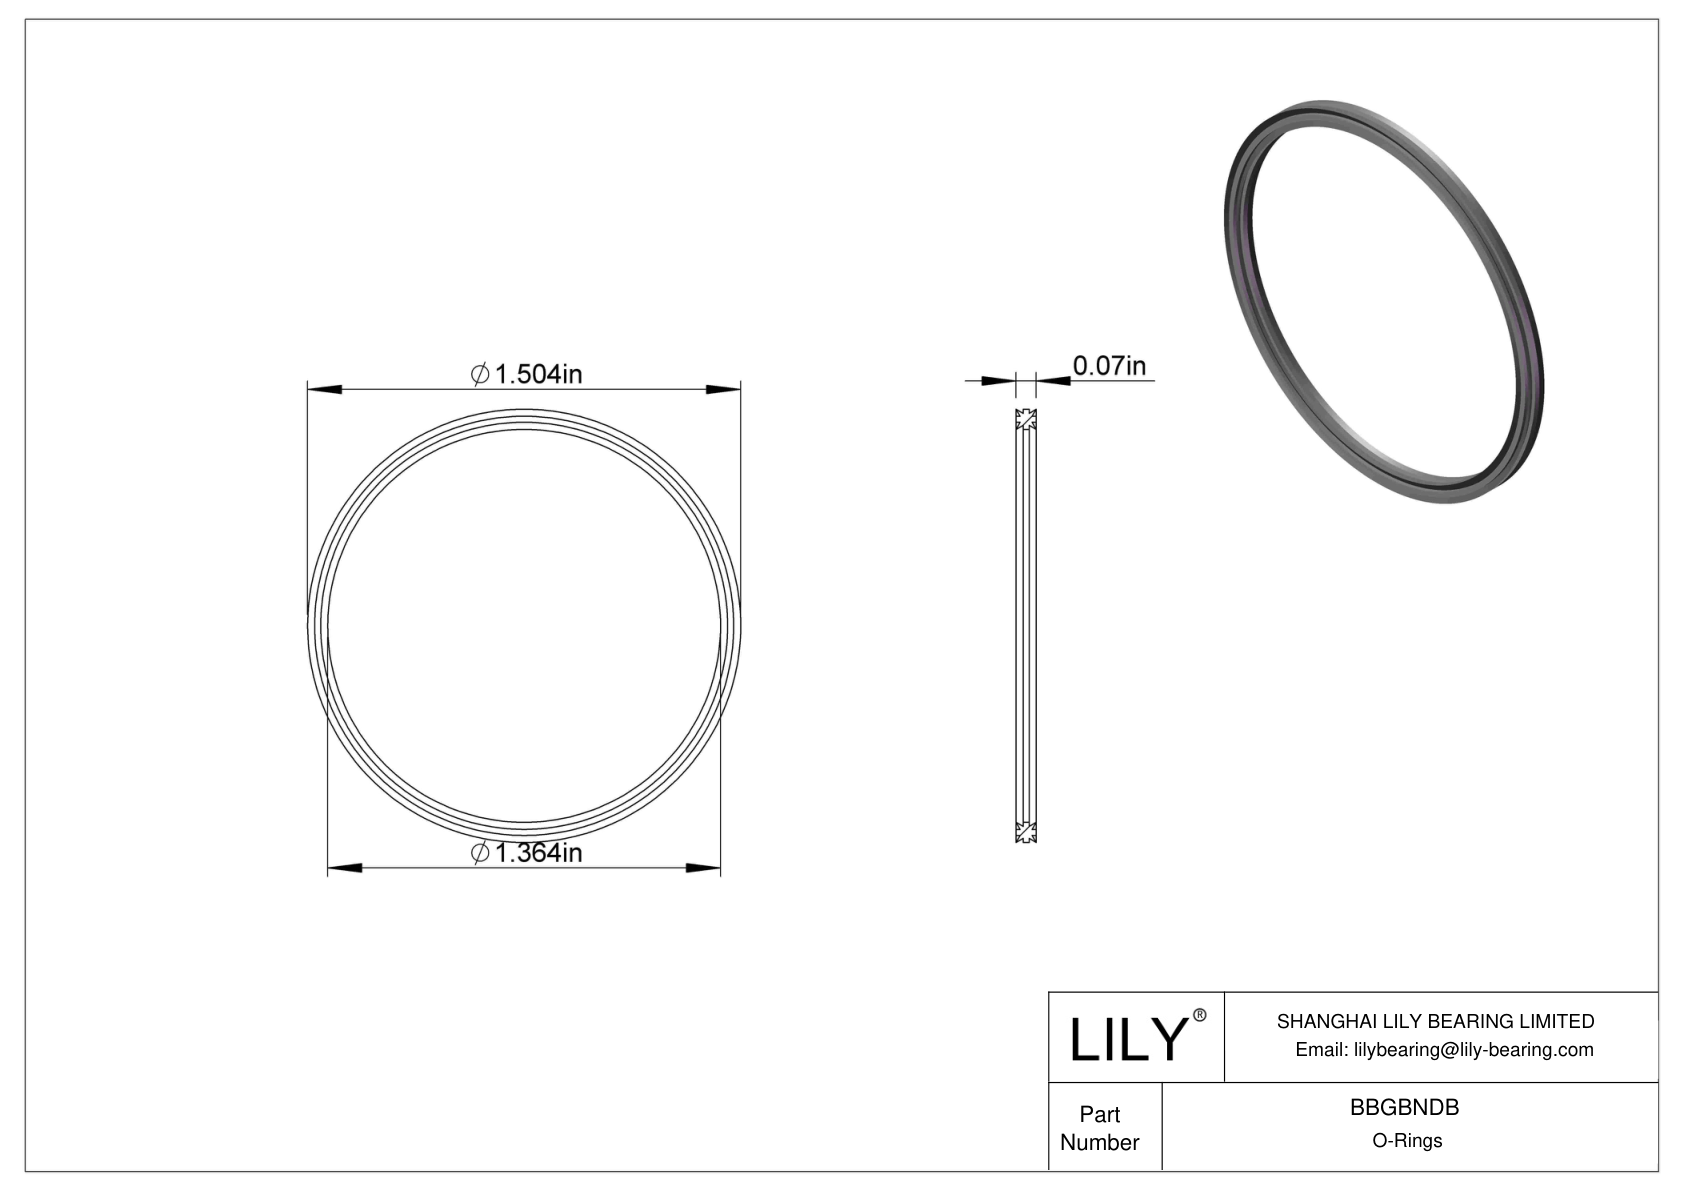 BBGBNDB Oil Resistant O-Rings Double X cad drawing